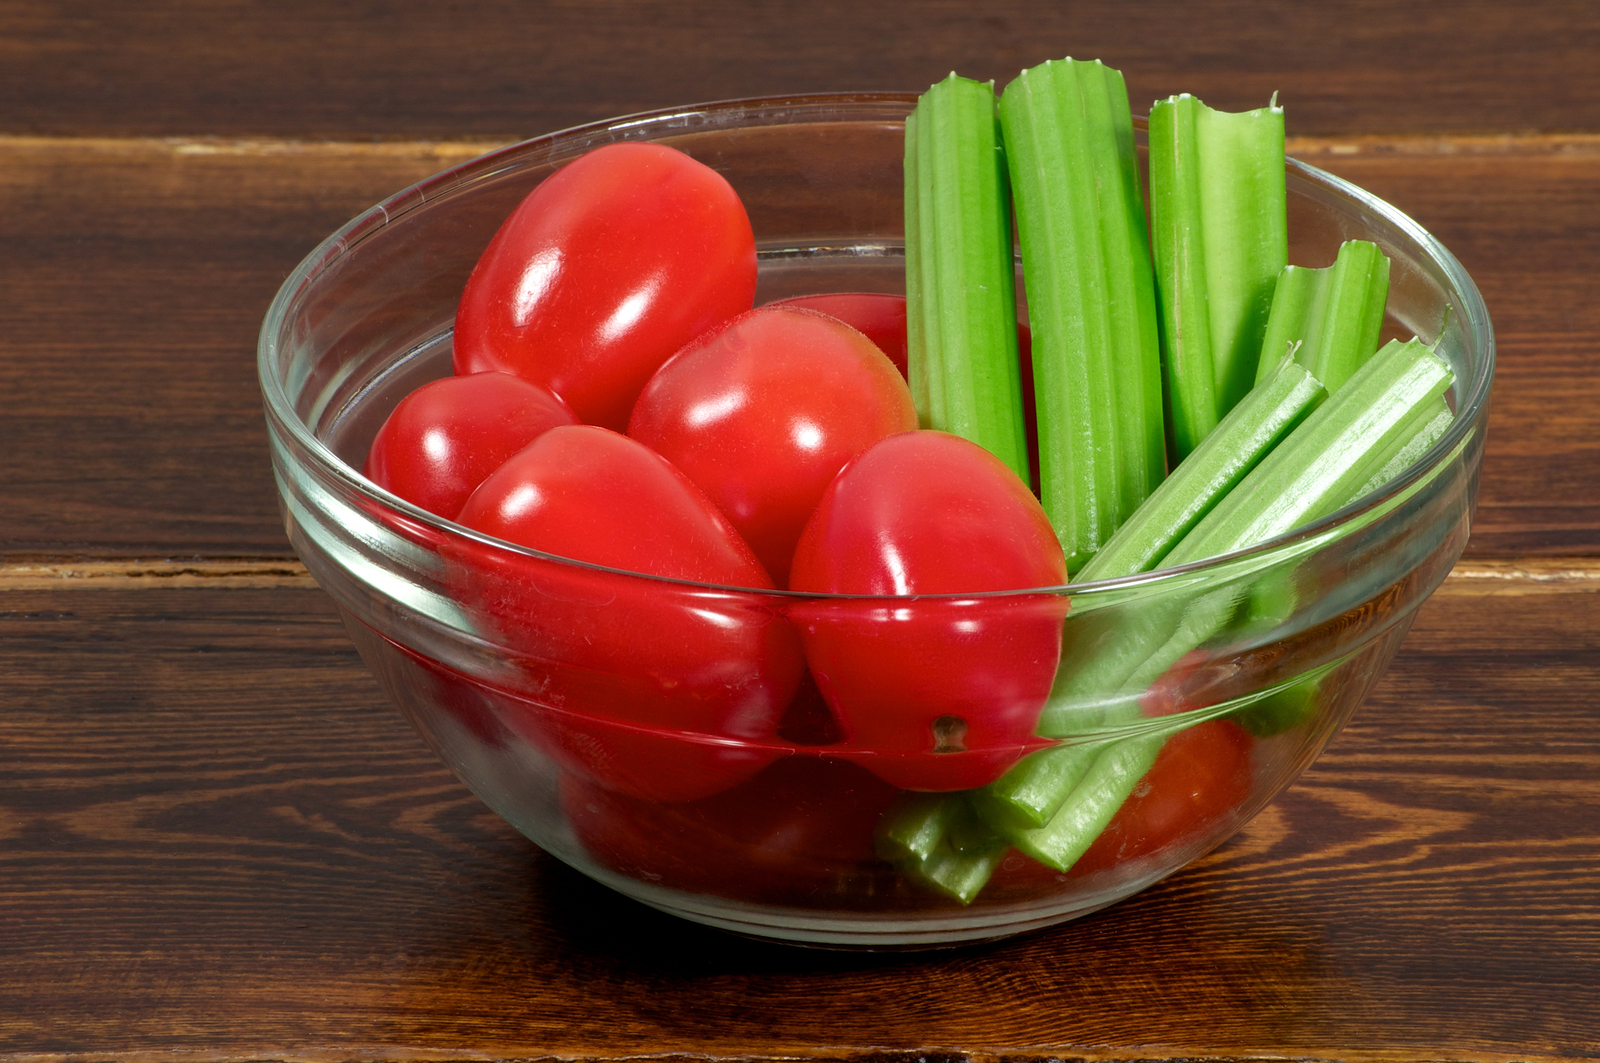 Image of Tomatoes and celery